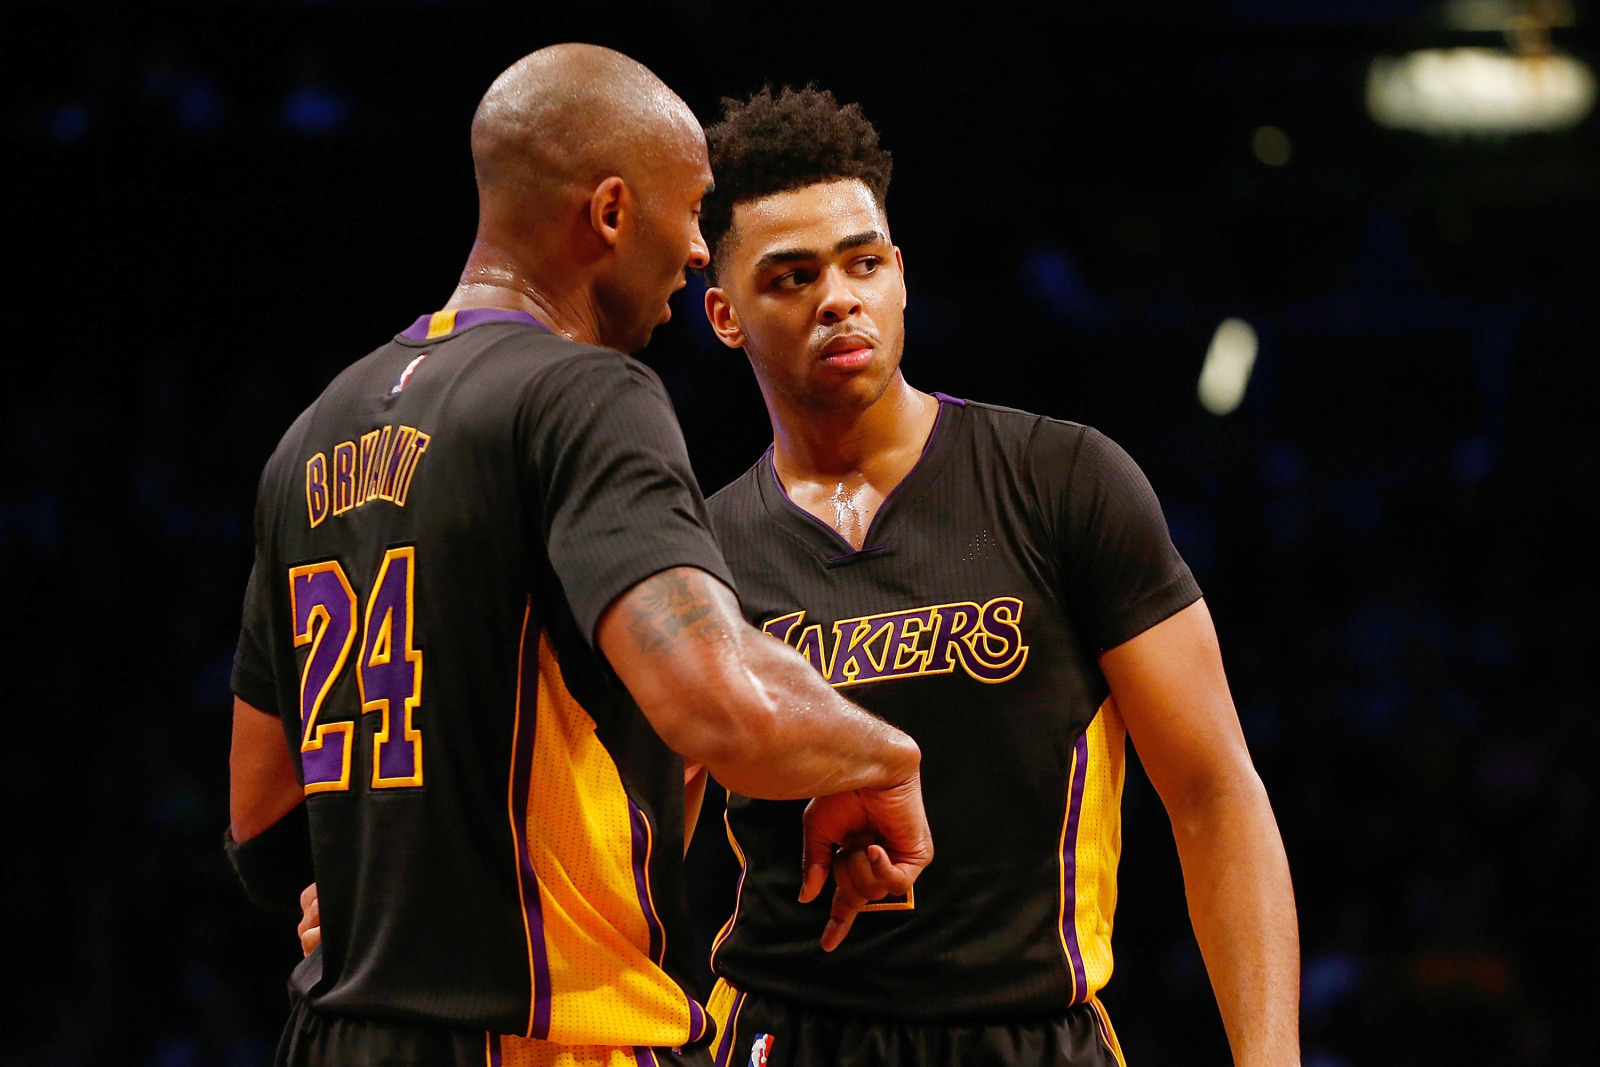 What did D'Angelo Russell learn from Kobe Bryant? 'So many jewels